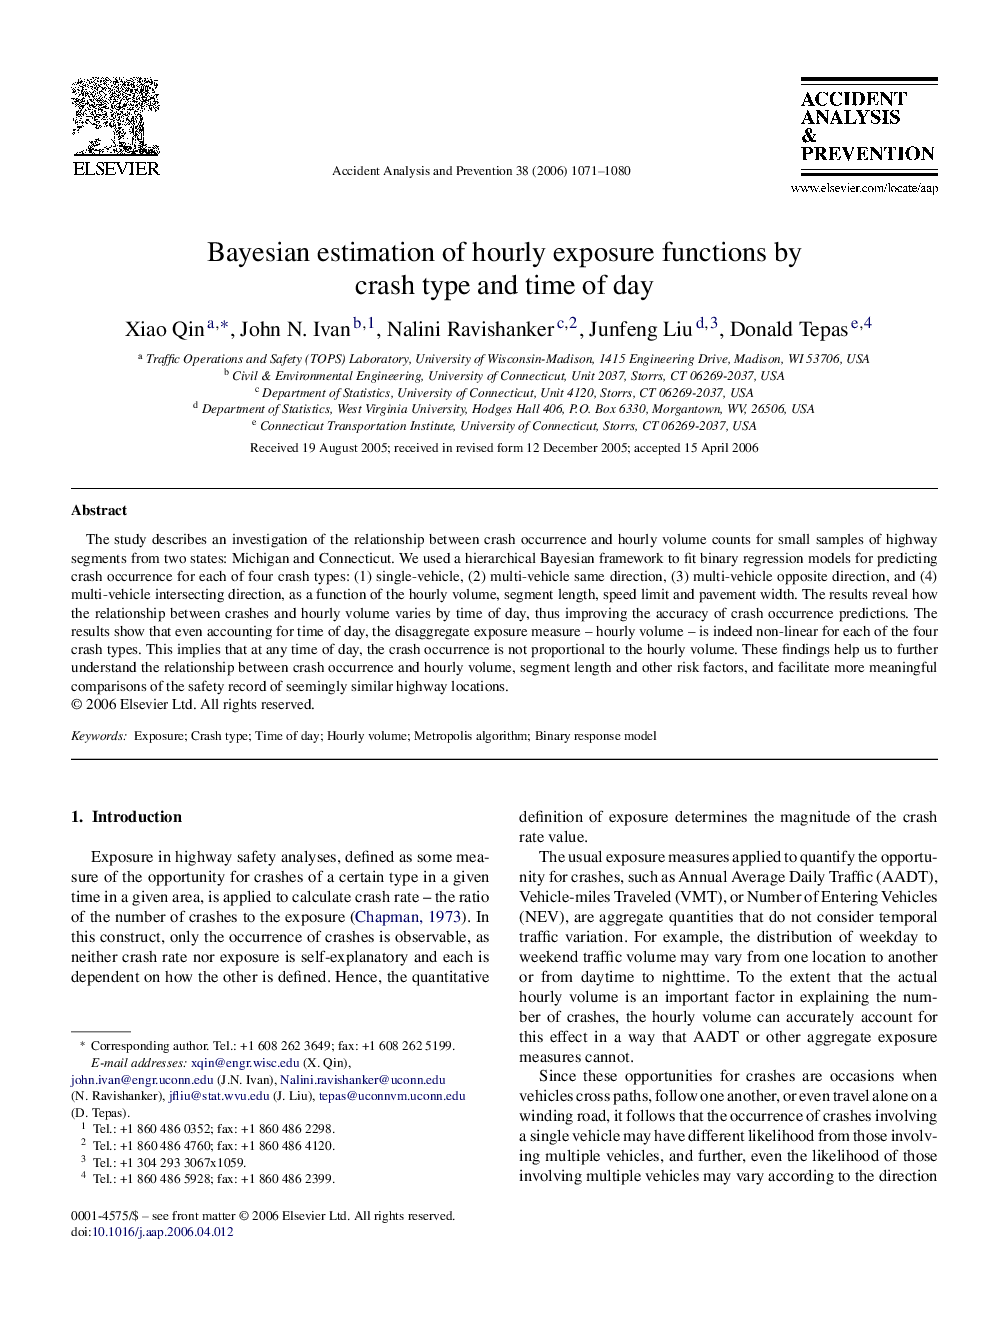 Bayesian estimation of hourly exposure functions by crash type and time of day